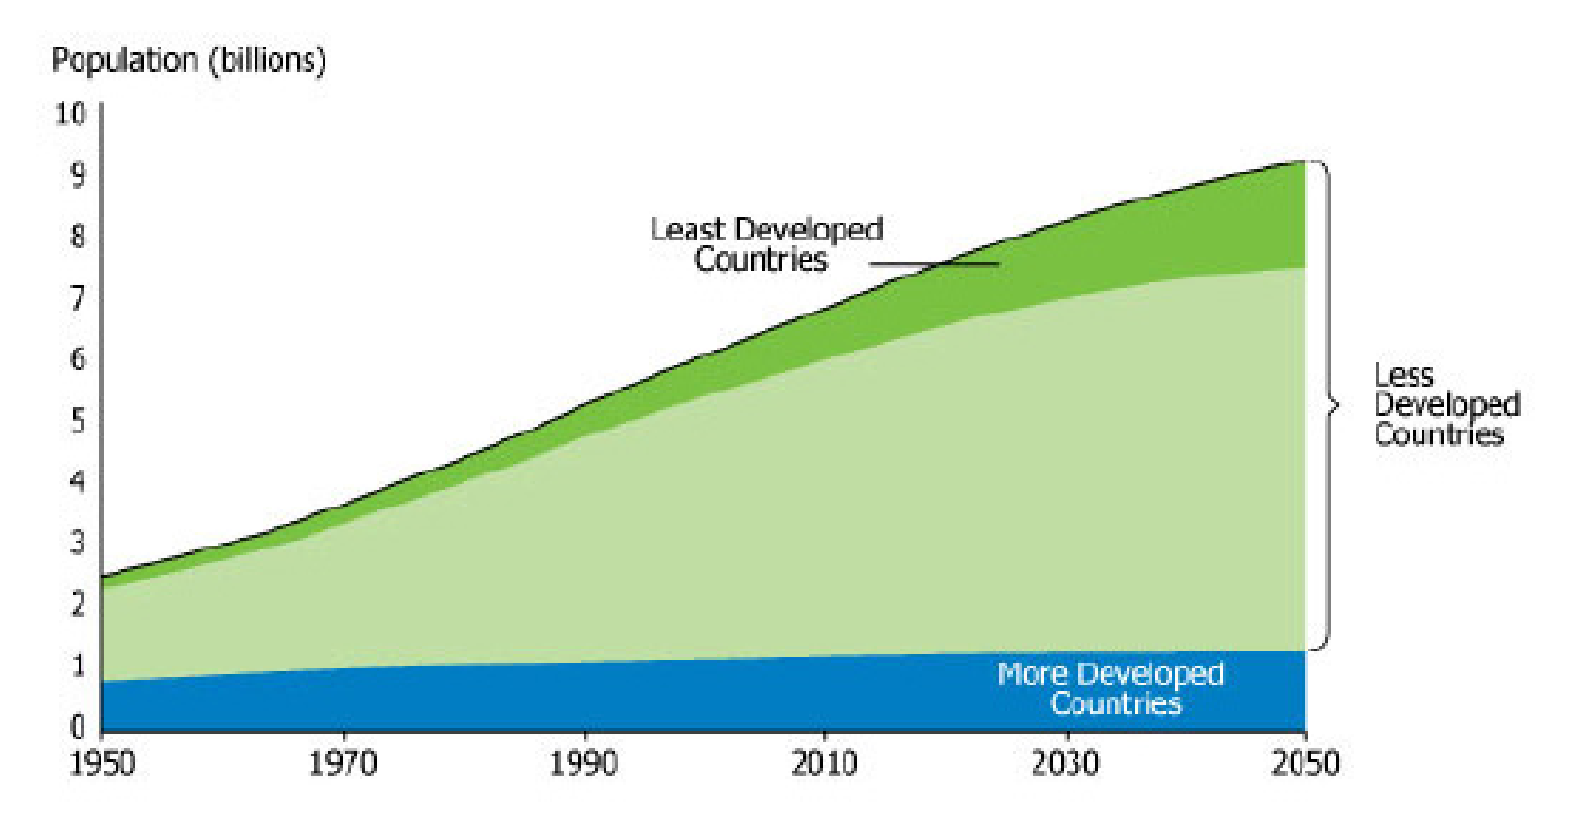 Figure 14: World populations projections 1950 to 2050: Division between countries according to development.